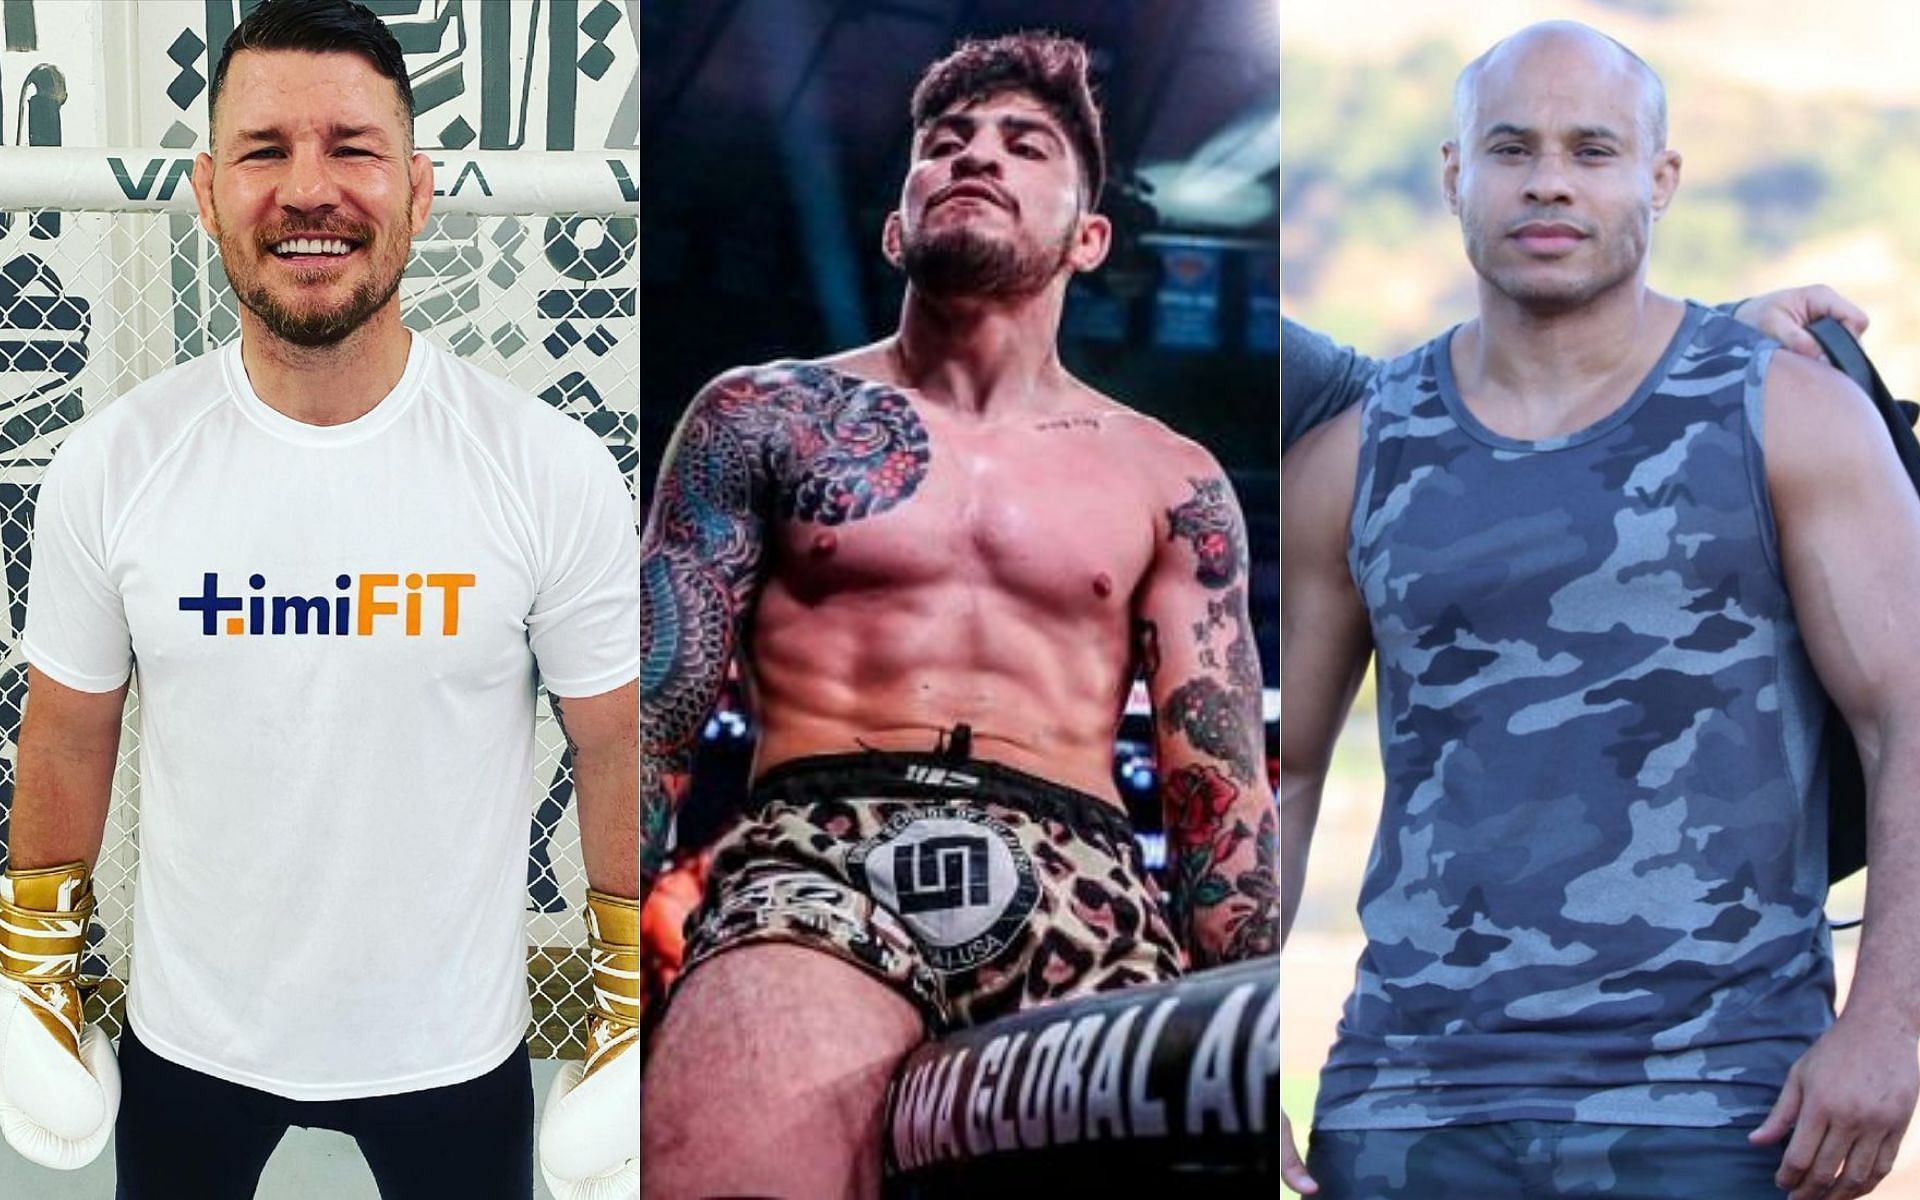 Michael Bisping (left), Dillon Danis (middle) and Ali Abdelaziz (right) [Image credits: @mikebisping, @dillondanis and @aliabdelaziz000 on Instagram]